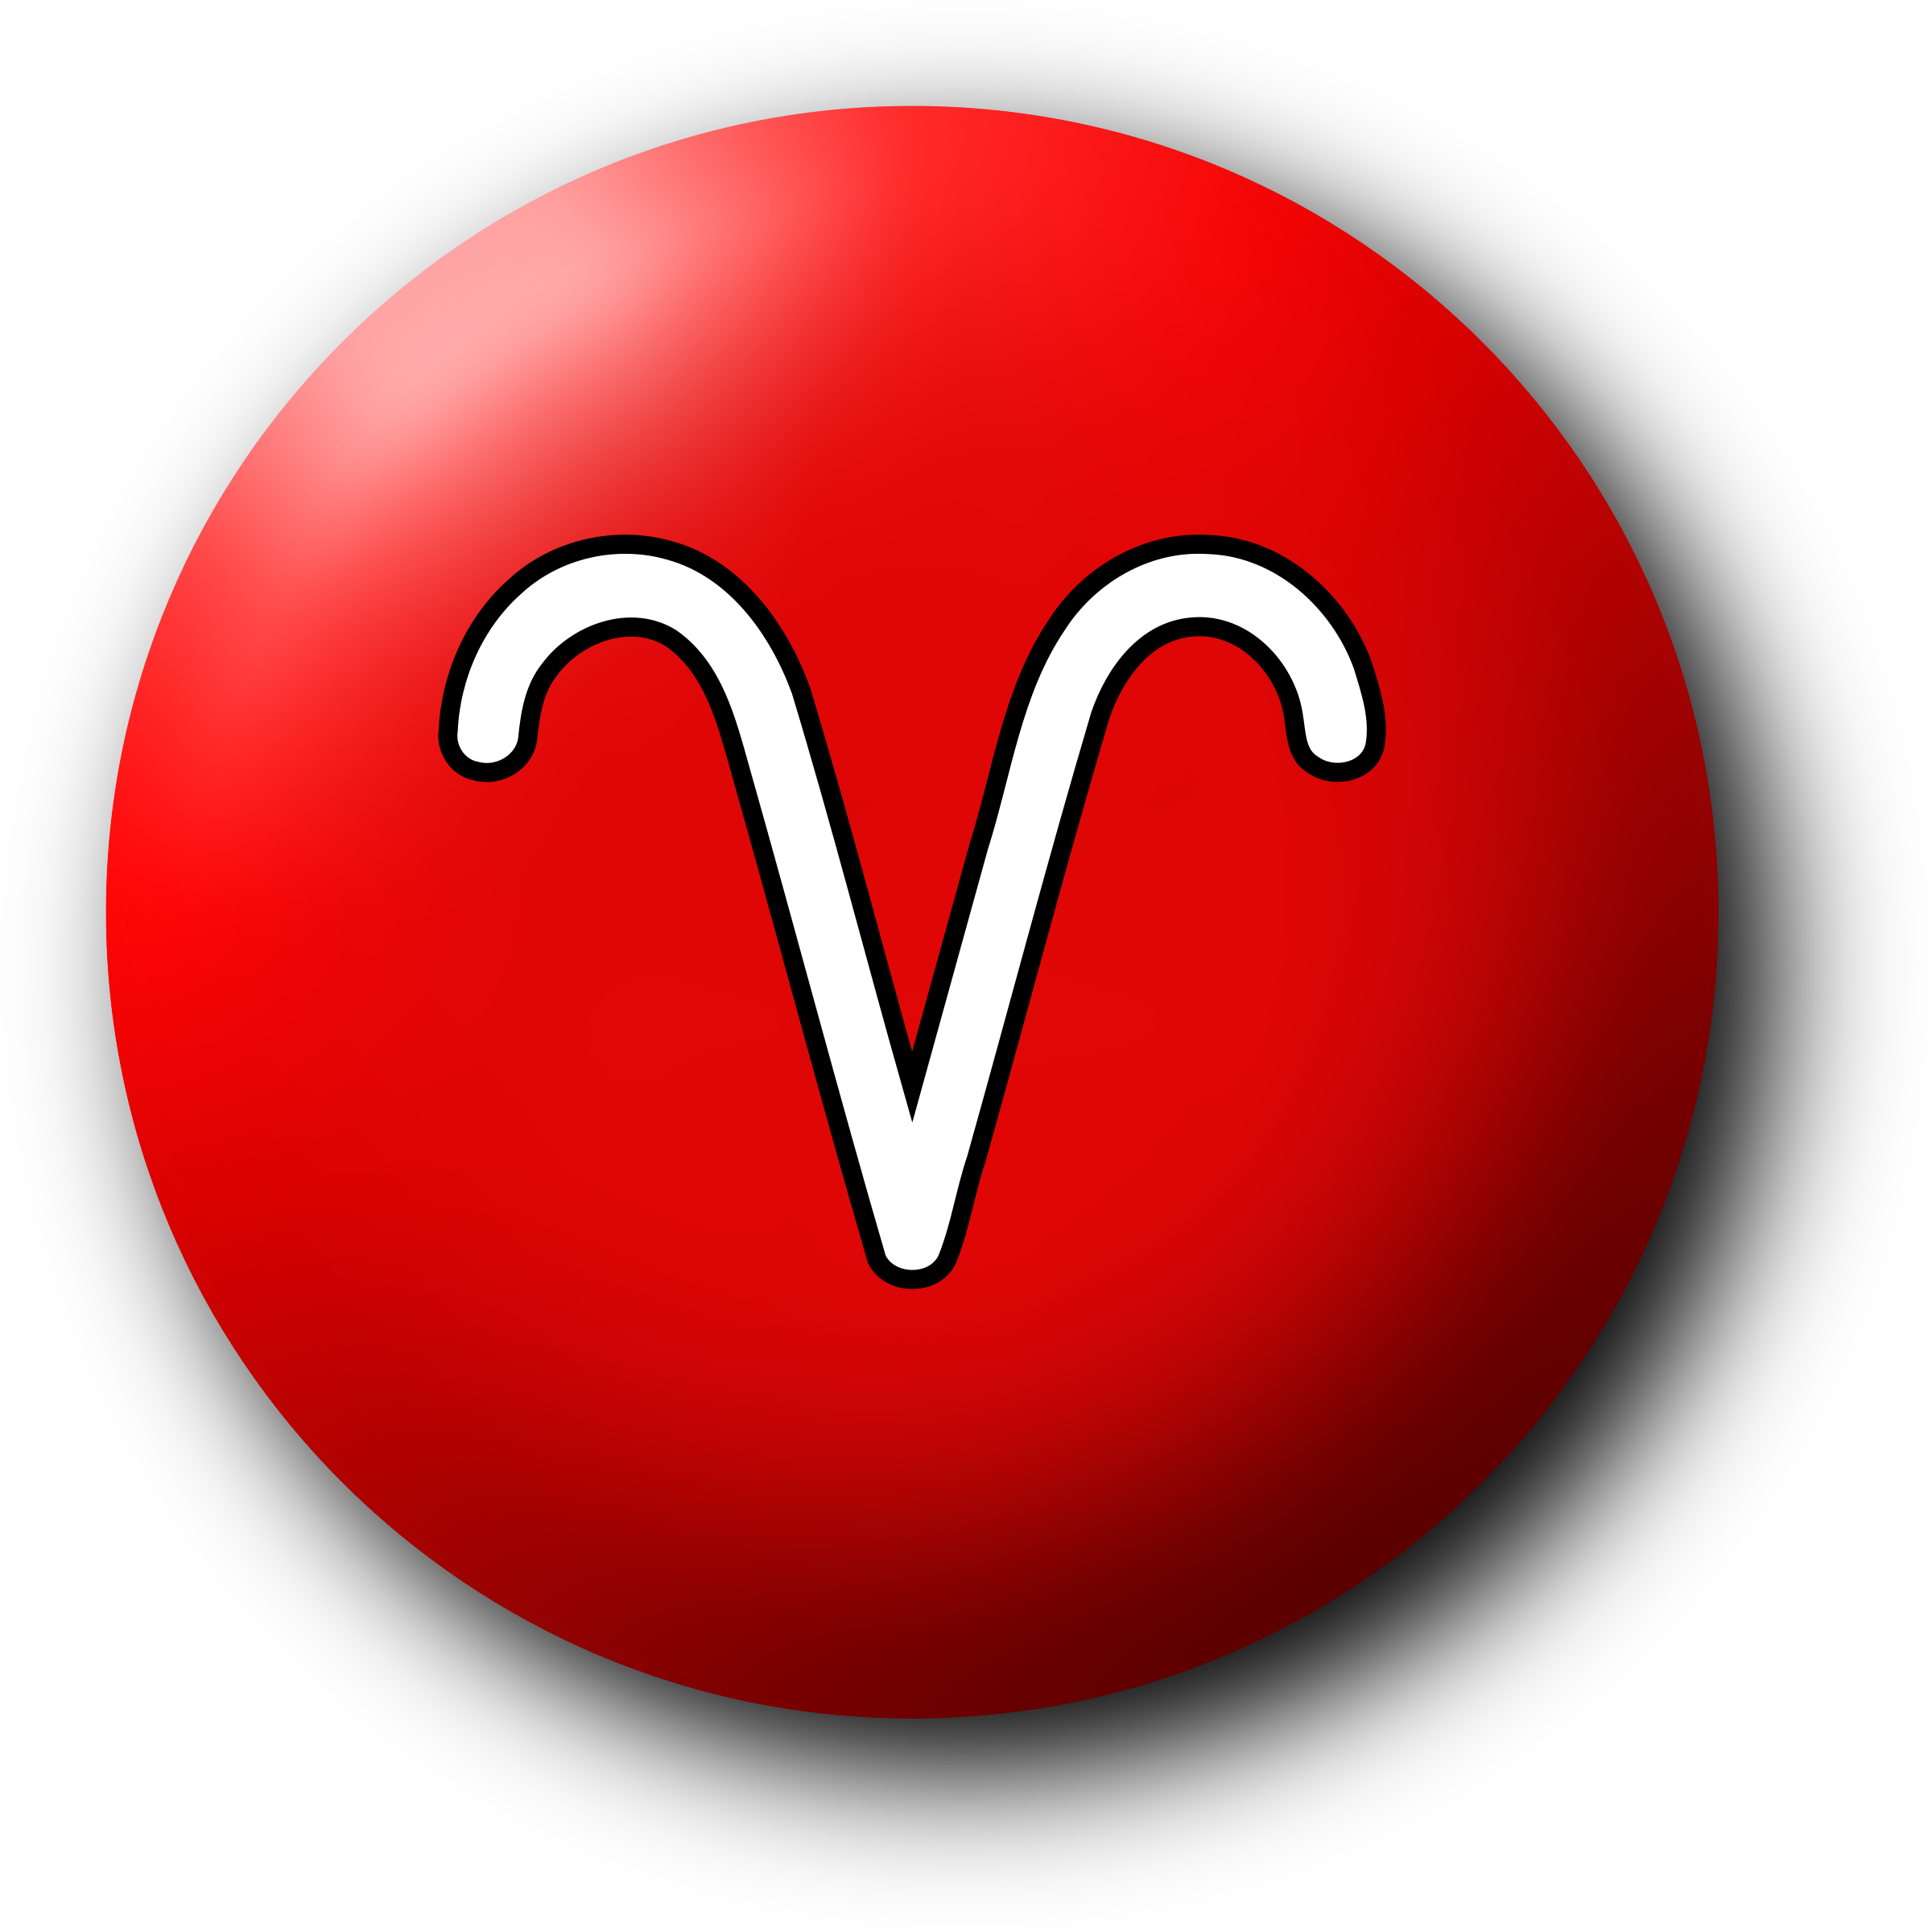 A Red Ball With A White Symbol On It